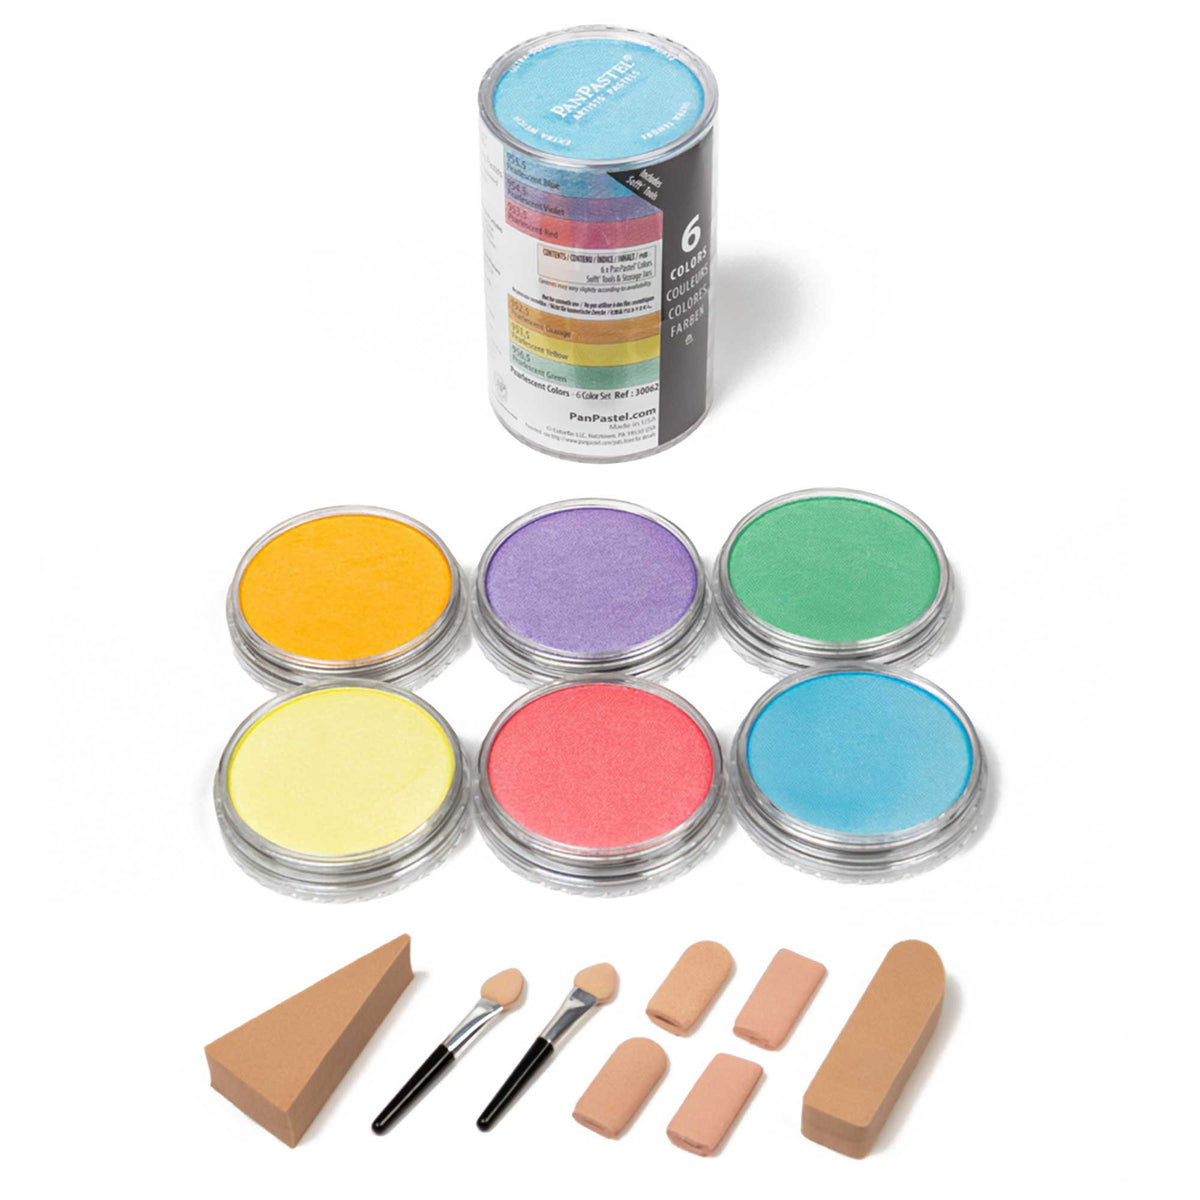 PanPastel Pearlescent Colours - Set of 6